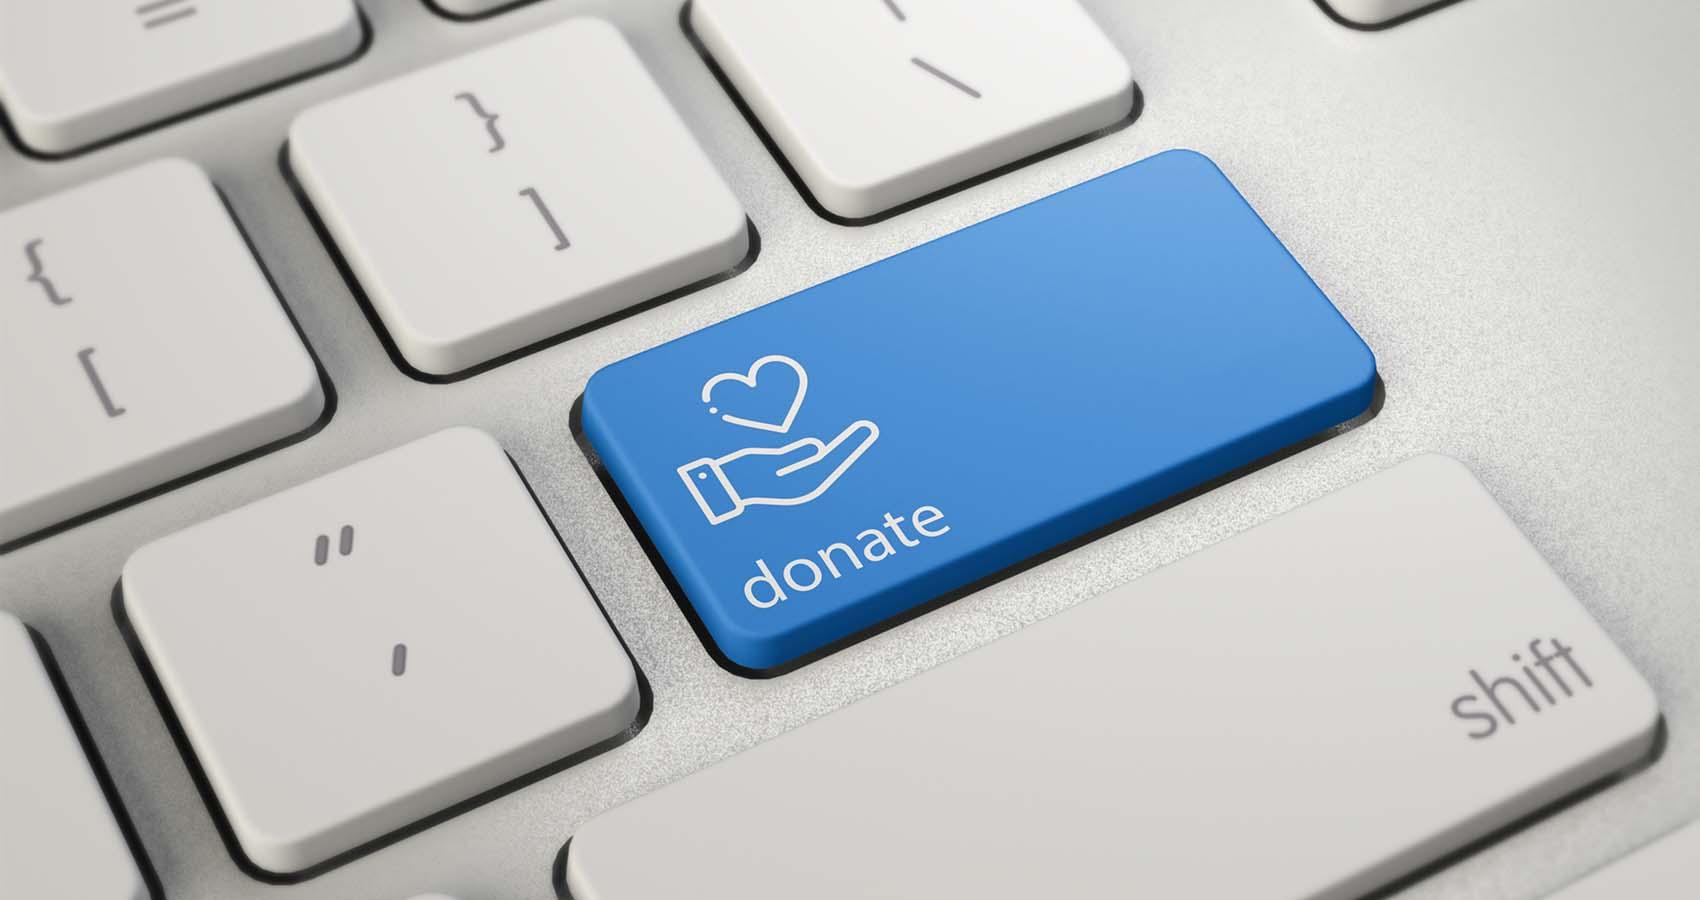 Donate button on keyboard